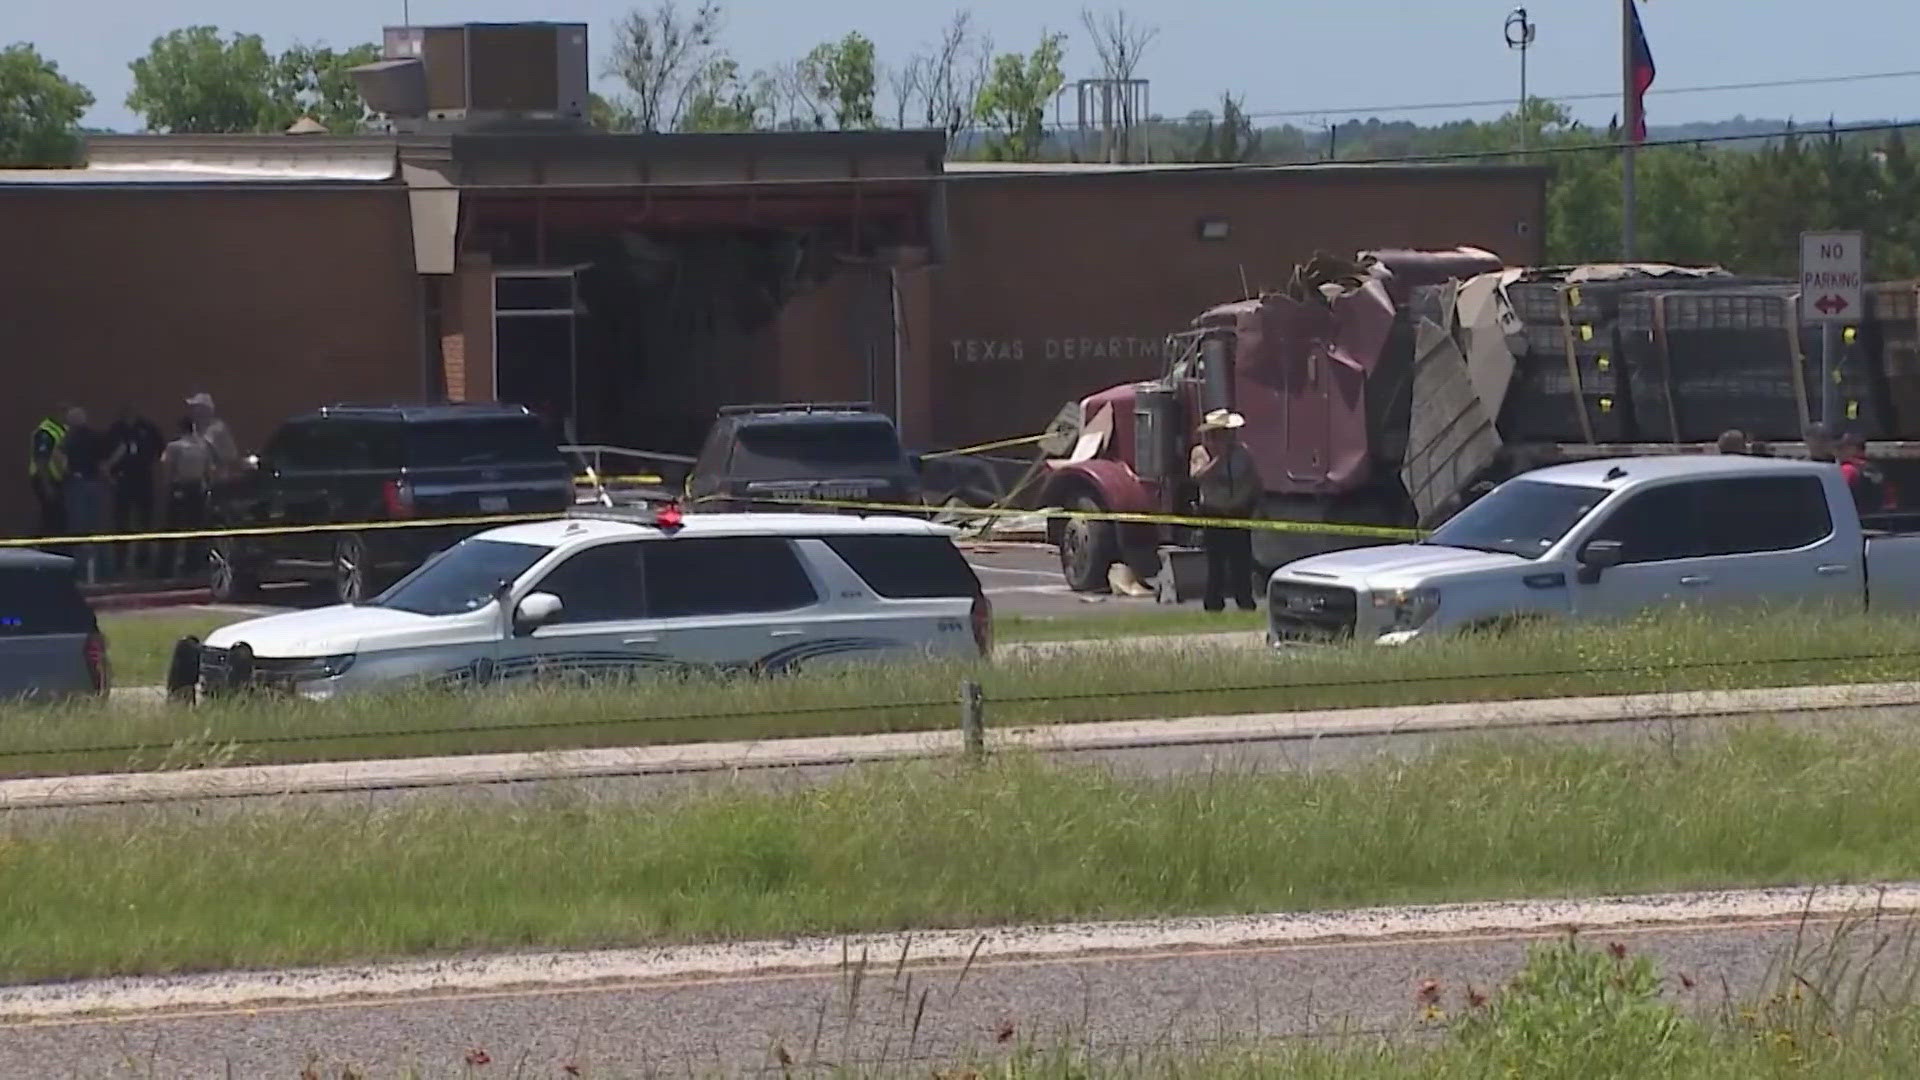 The driver of the 18-wheeler is charged with felony murder, as well as several counts of assault.